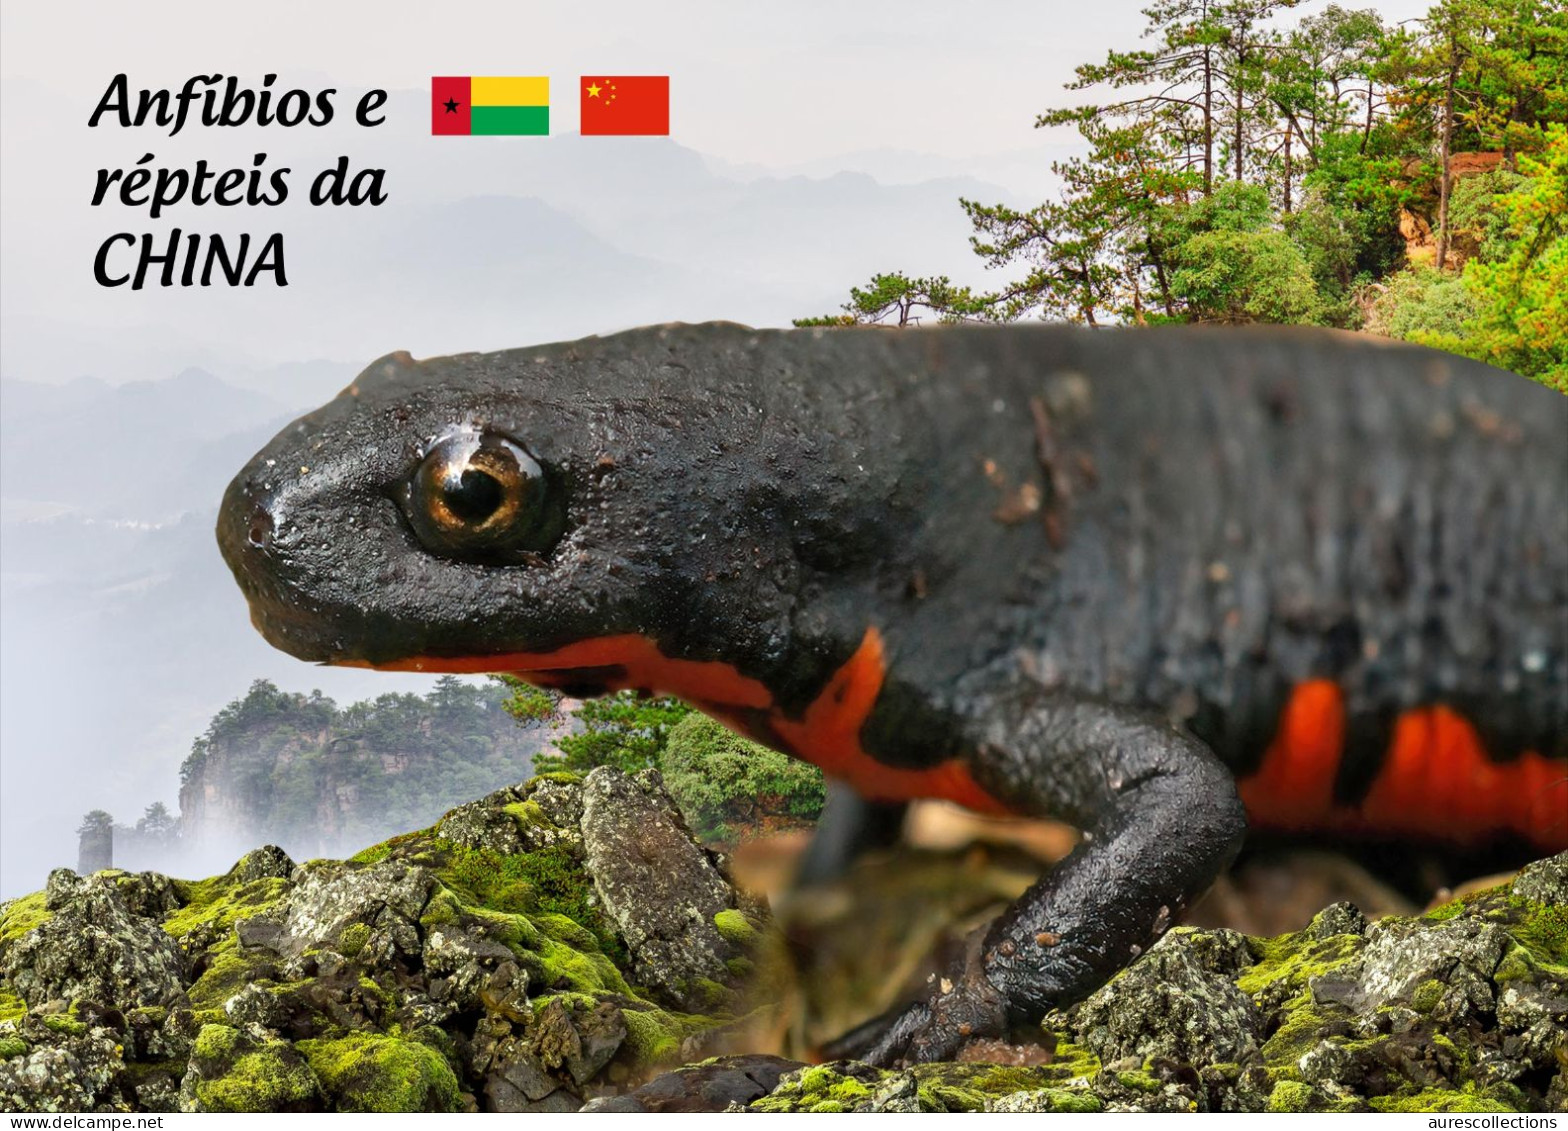 GUINEA BISSAU 2024 STATIONERY CARD 6V - CHINA AMPHIBIANS & REPTILES FROG FROGS TURTLE TURTLES SNAKES CROCODILE NEWT - Frogs